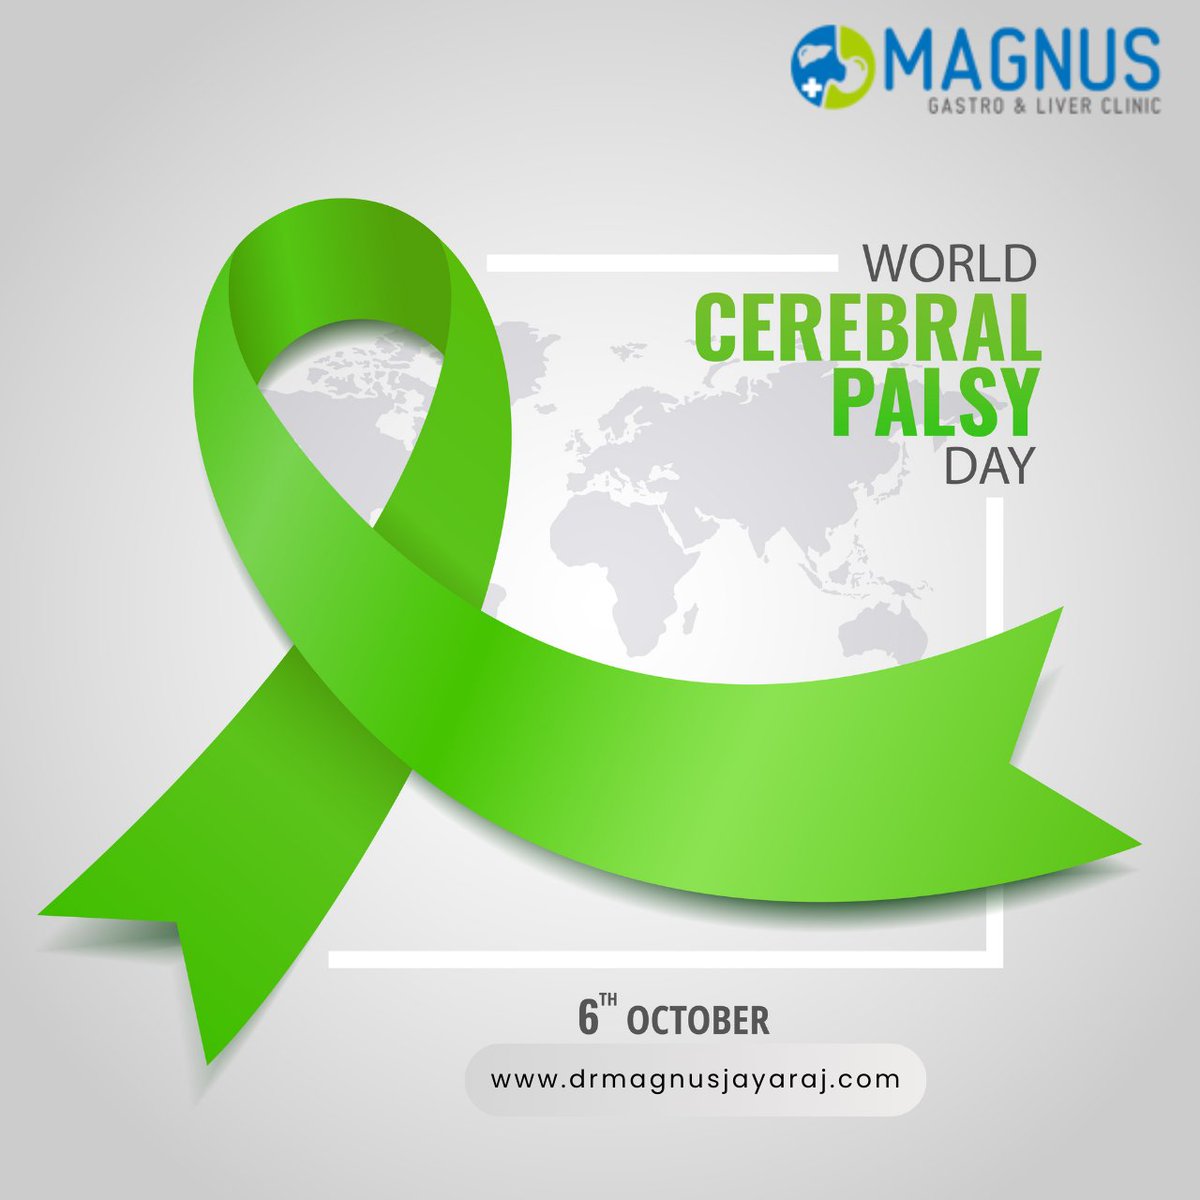 World Cerebral Palsy Day
Inclusion starts with understanding. Take a moment today to learn more about Cerebral Palsy and the amazing individuals who overcome it daily.
#CerebralPalsy
#CPAwareness
#CerebralPalsyAwareness
#CPWarrior
#AbilityNotDisability
#InclusionMatters